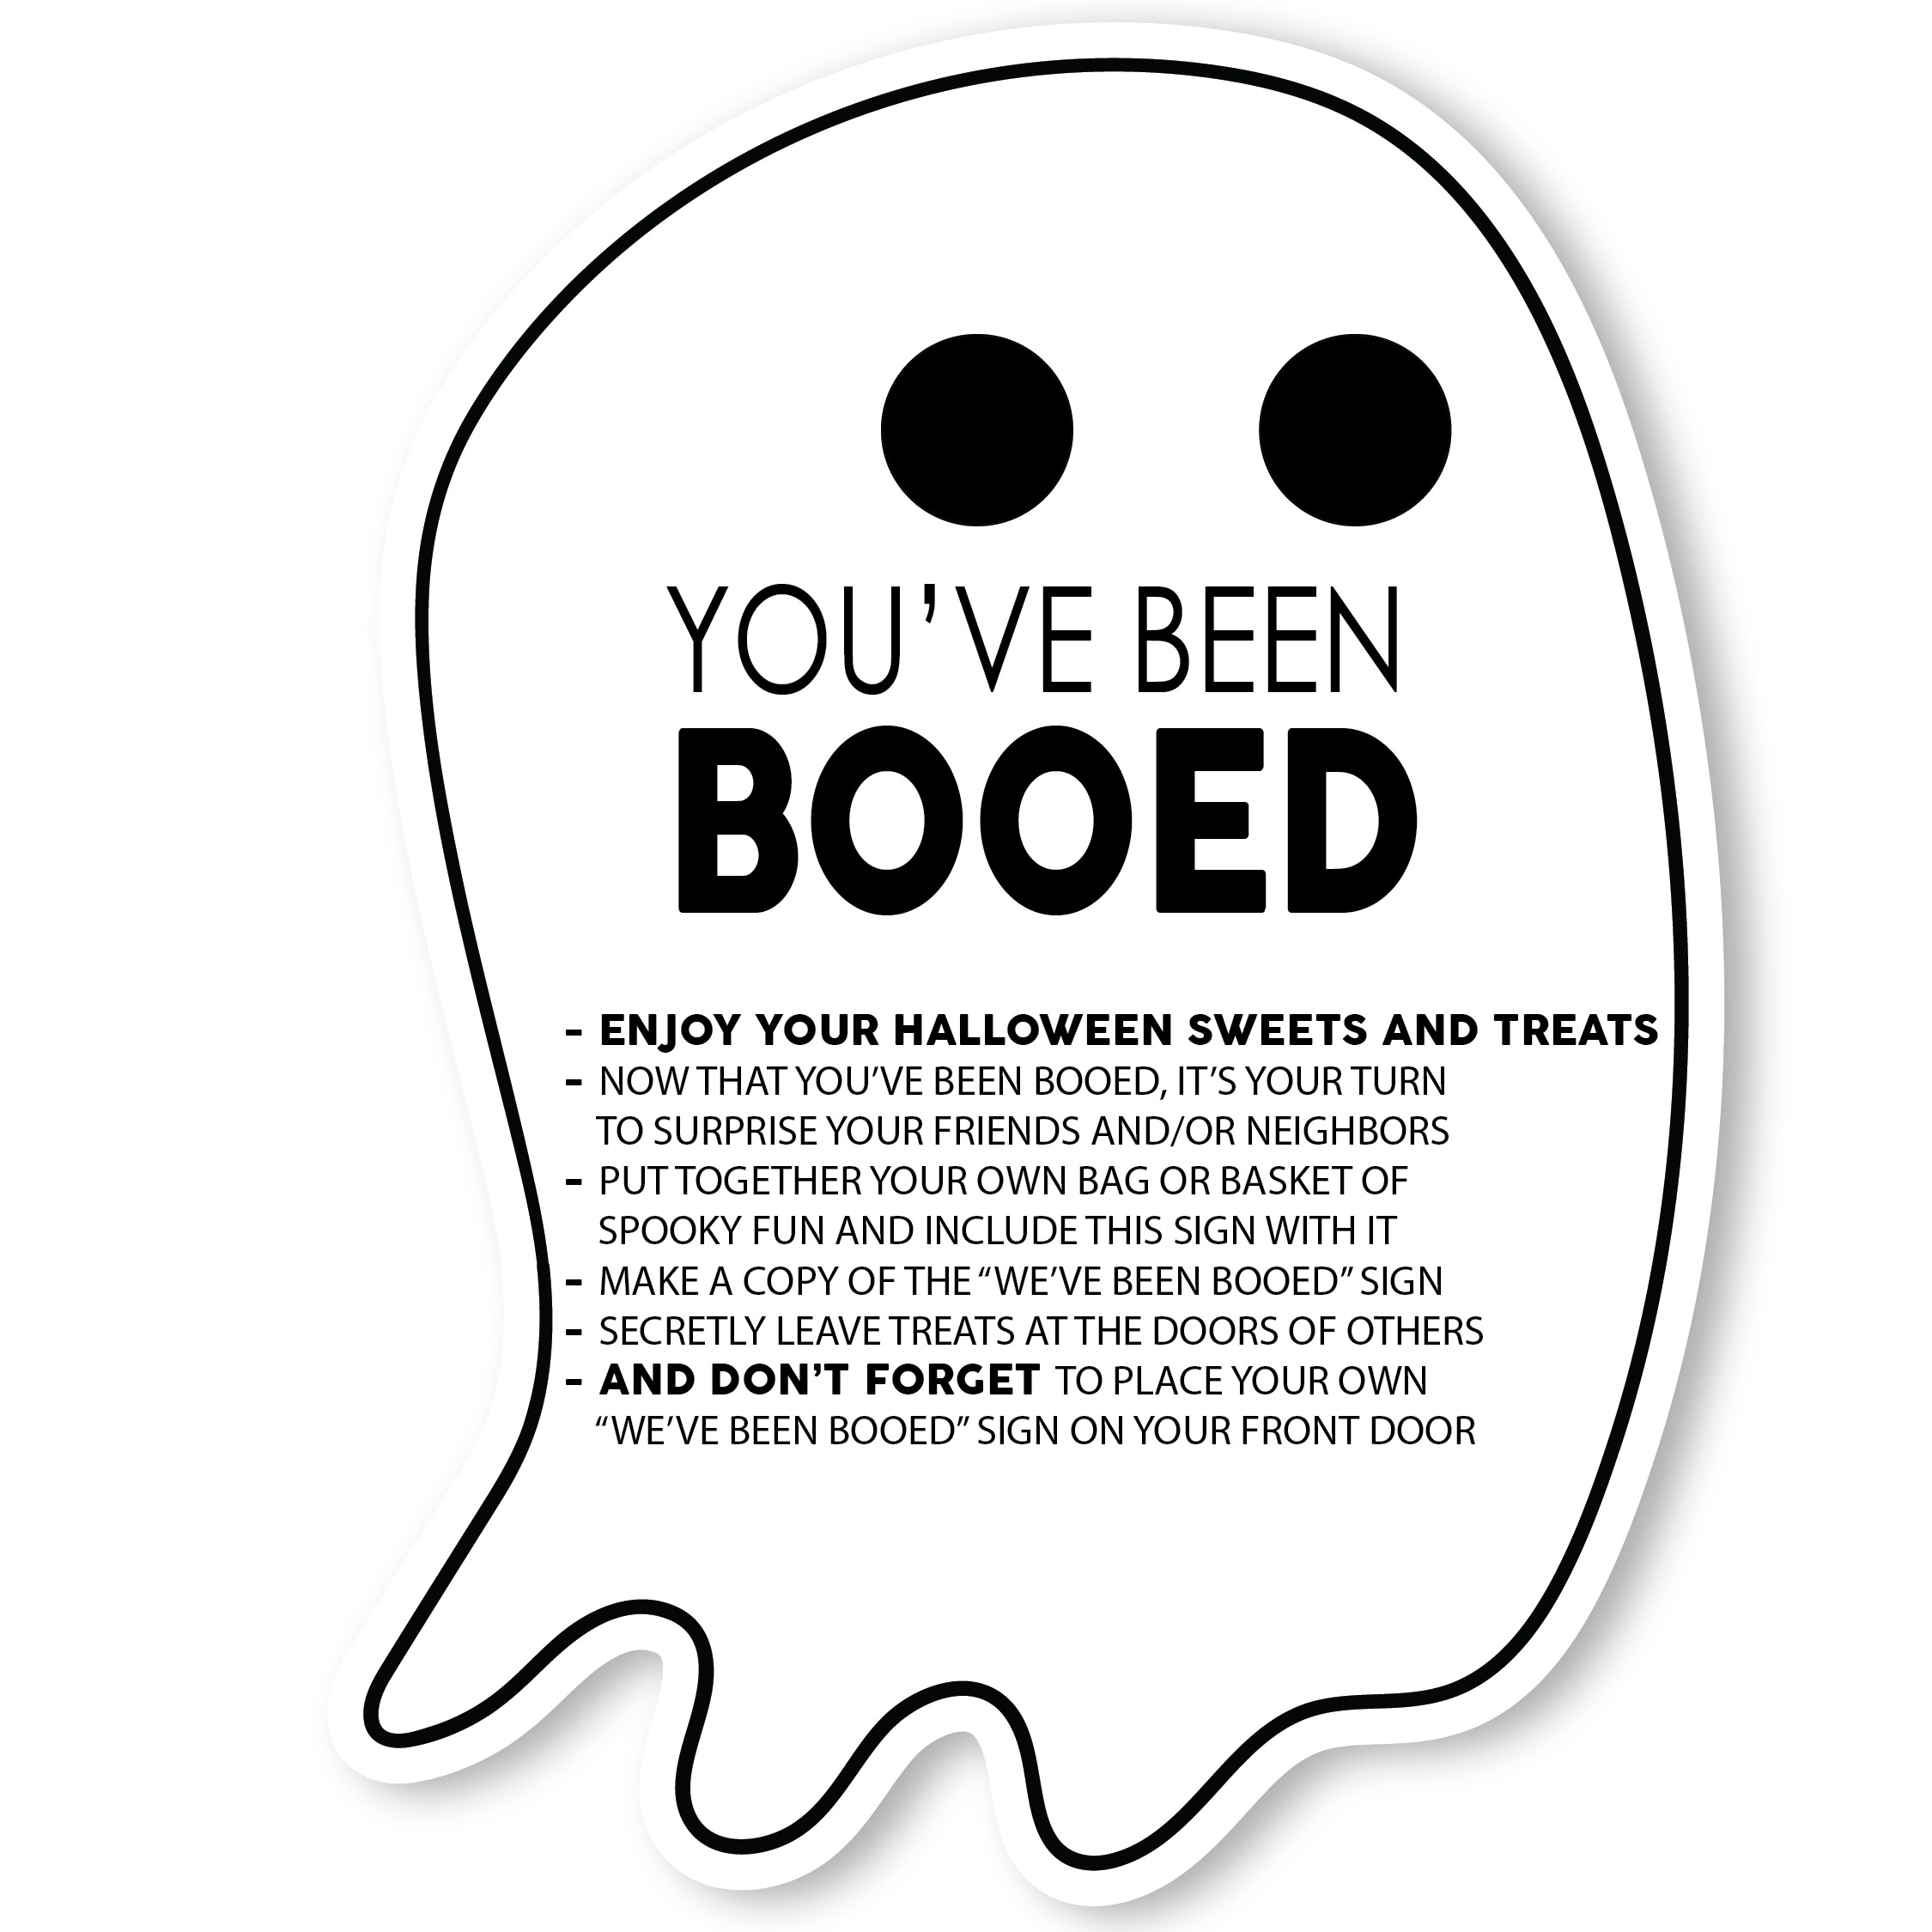 6 Best Images Of Printable Halloween Boo Game Halloween Neighborhood Boo Game Halloween Boo